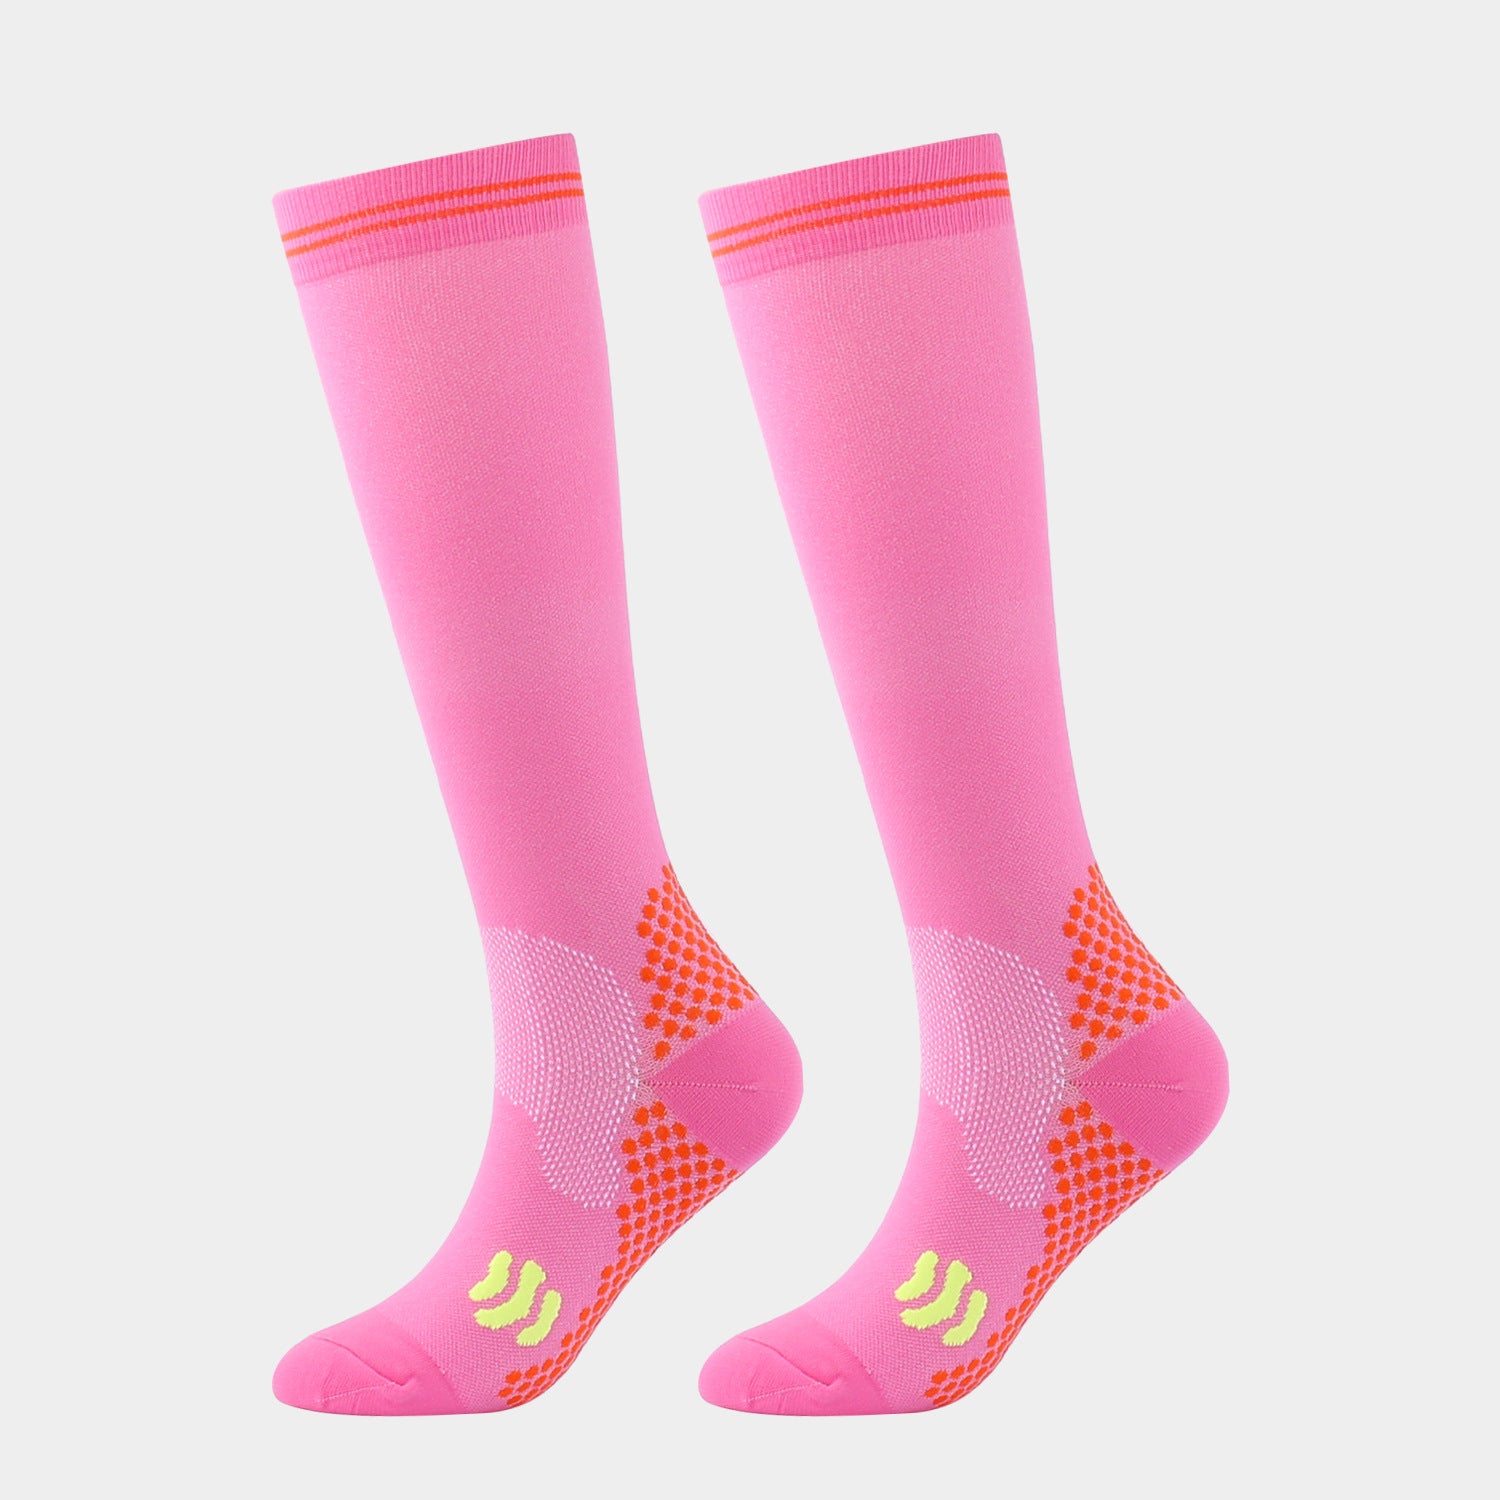 SSDH 4pcs Compression Socks for Women and Men 20-30 mmHg,is Best